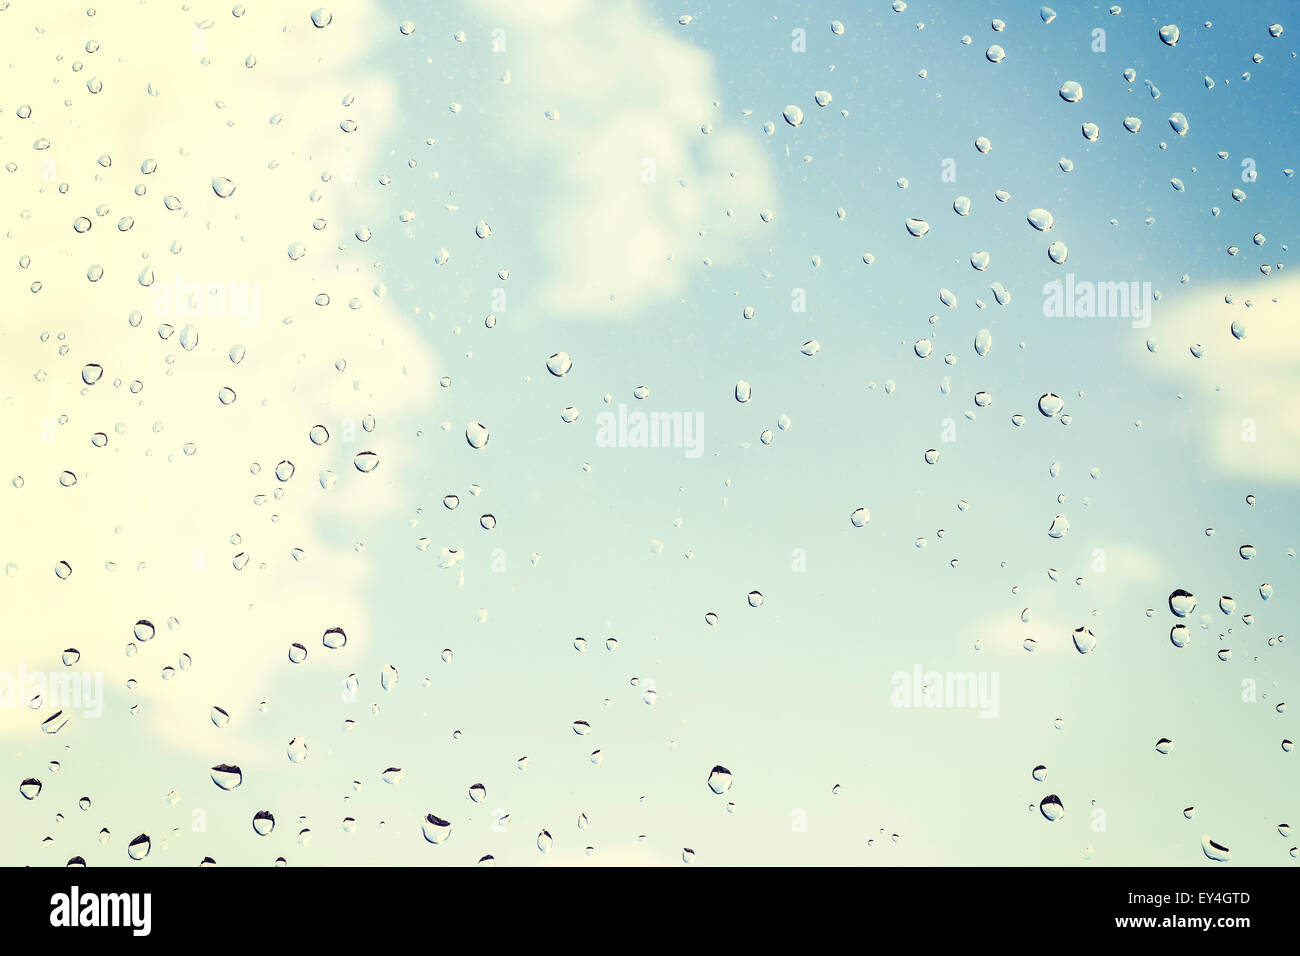 Drops of rain on glass, natural background. Stock Photo